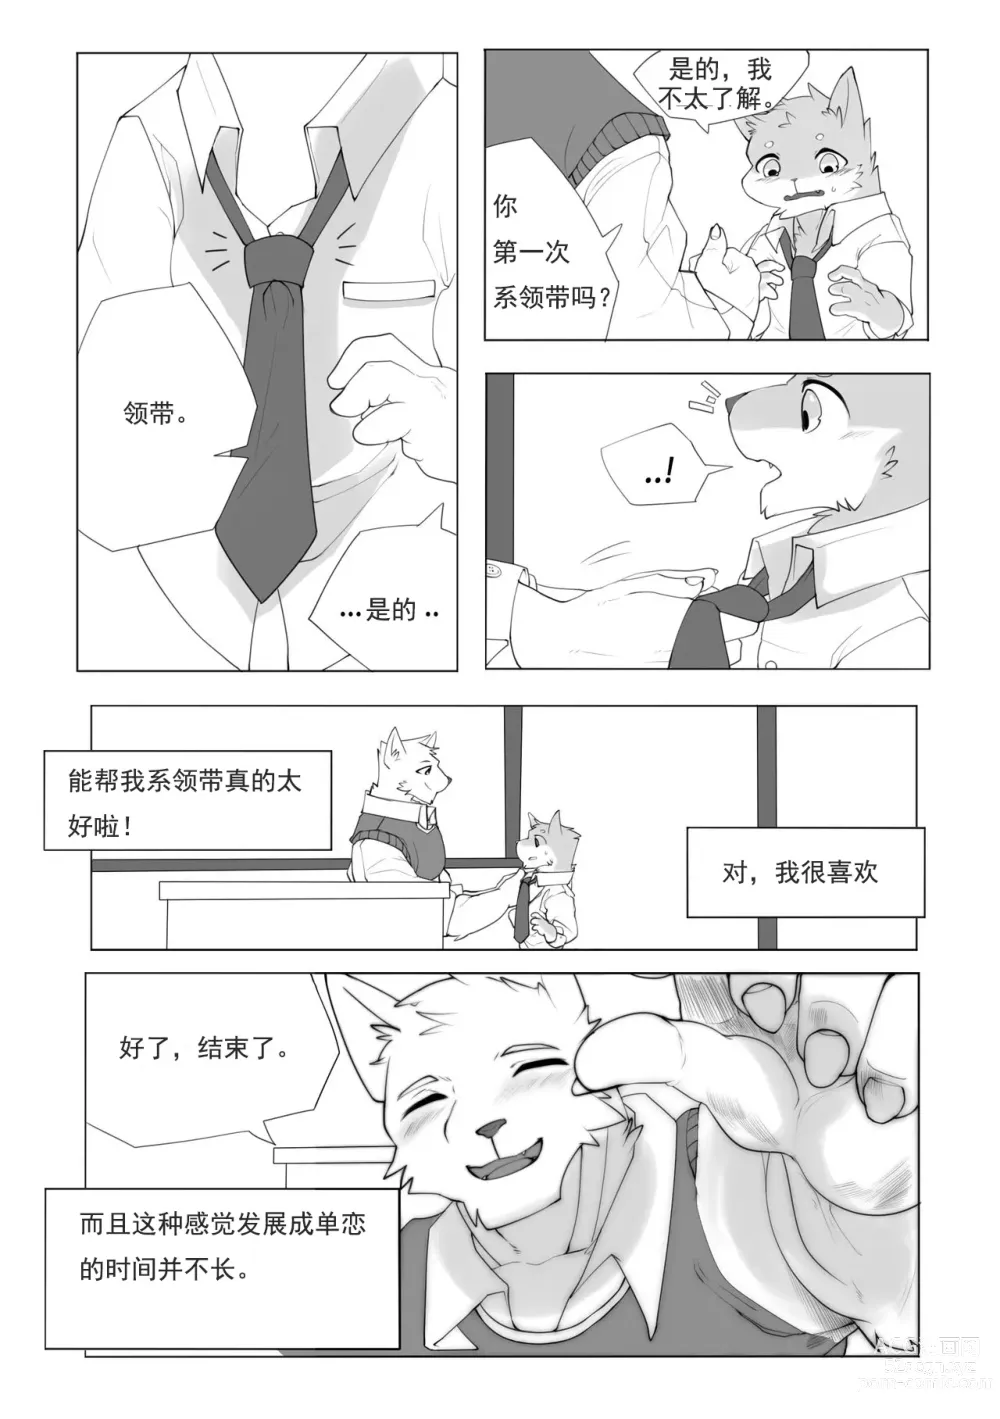 Page 9 of doujinshi 单恋 （工口译制）